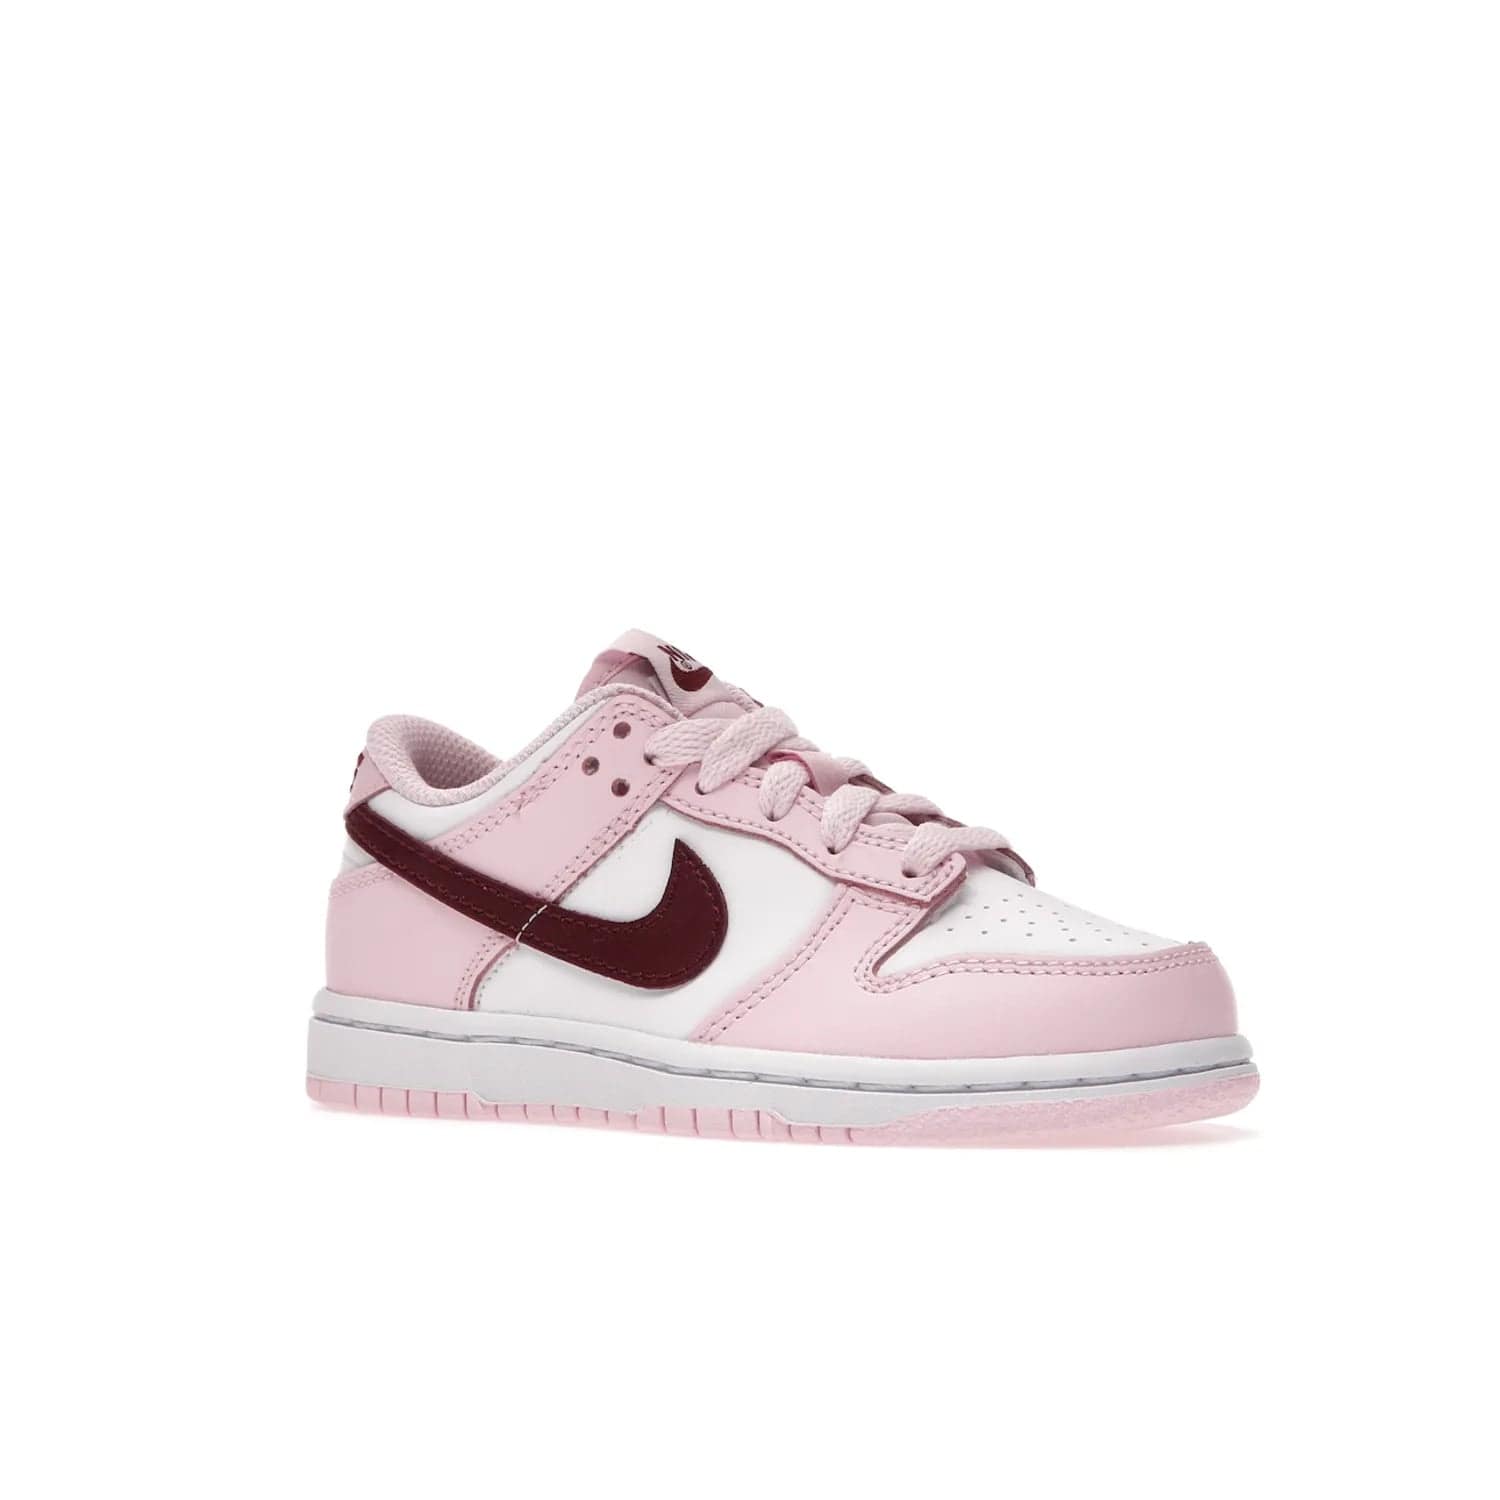 Nike Dunk Low Pink Red White (PS) - Image 4 - Only at www.BallersClubKickz.com - Introducing the Nike Dunk Low Pink Red White (PS), the perfect addition to your sneaker collection. A classic silhouette with modern vibrant colors, including a pink upper with red and white accents and a white midsole. Comfort and durability, perfect for any outfit. Limited edition, available June 22nd.